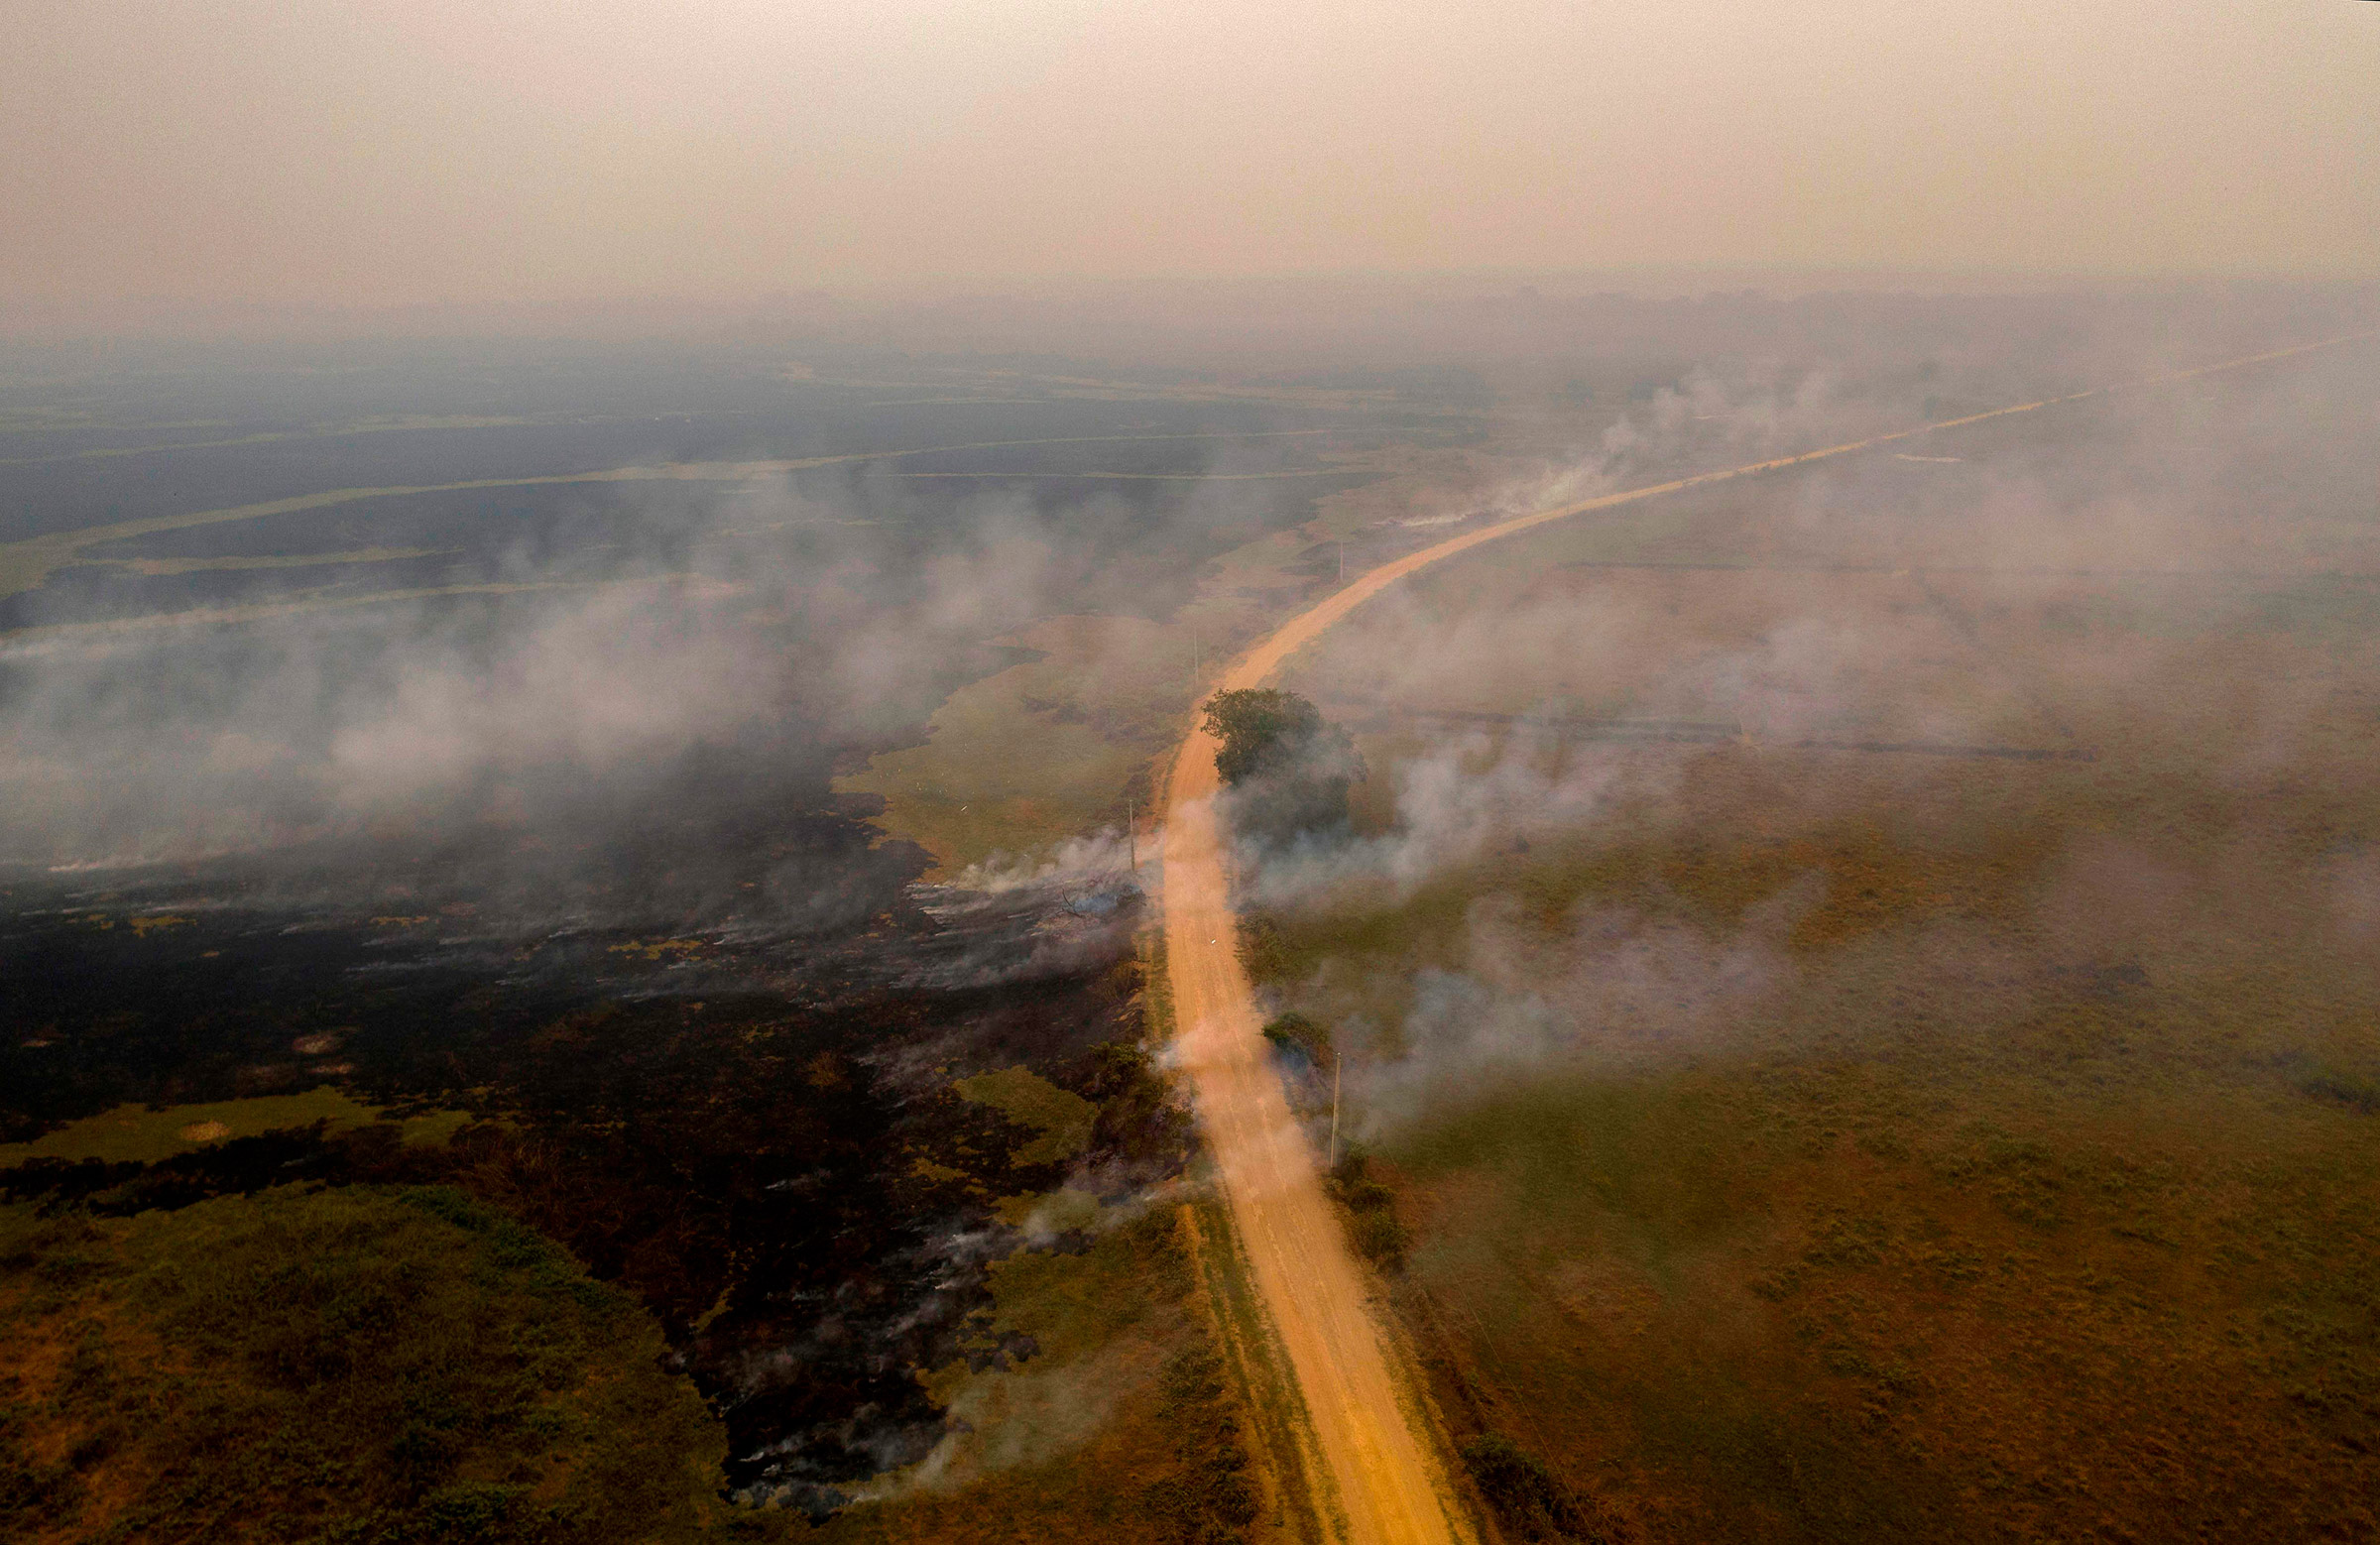 Smoke billows from fires near the Transpantaneira road on Sept. 14.